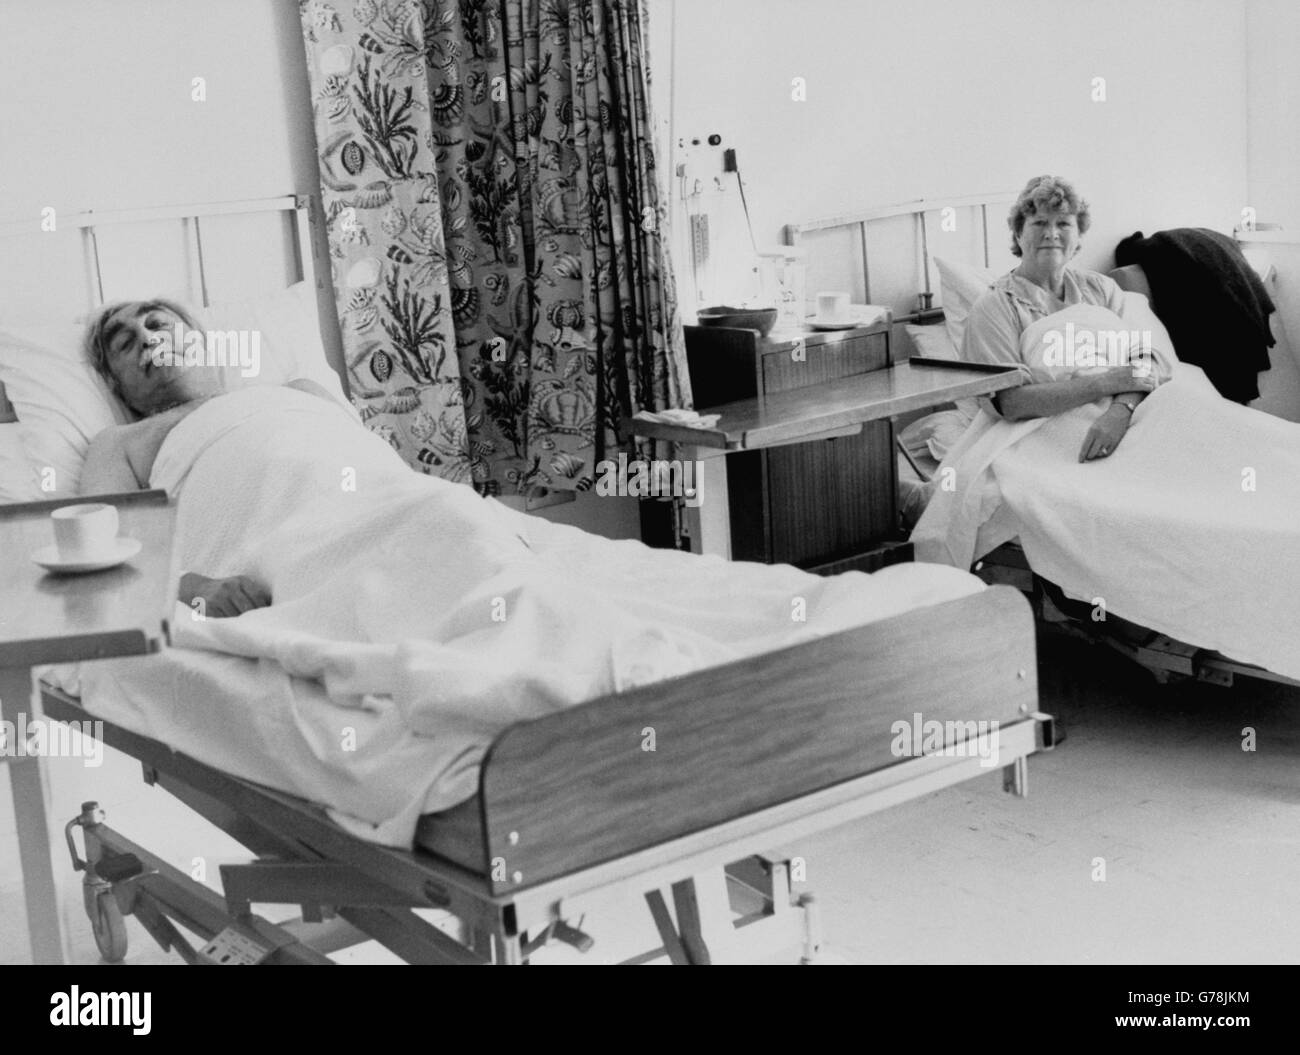 Sir Walter Clegg, Tory MP for Wyre, and his wife Elise in single beds at the Royal Sussex County Hospital, Brighton, recovering from their ordeal in the IRA bombing of the Grand Hotel. The couple were in Brighton for the Conservative Party Conference. Stock Photo